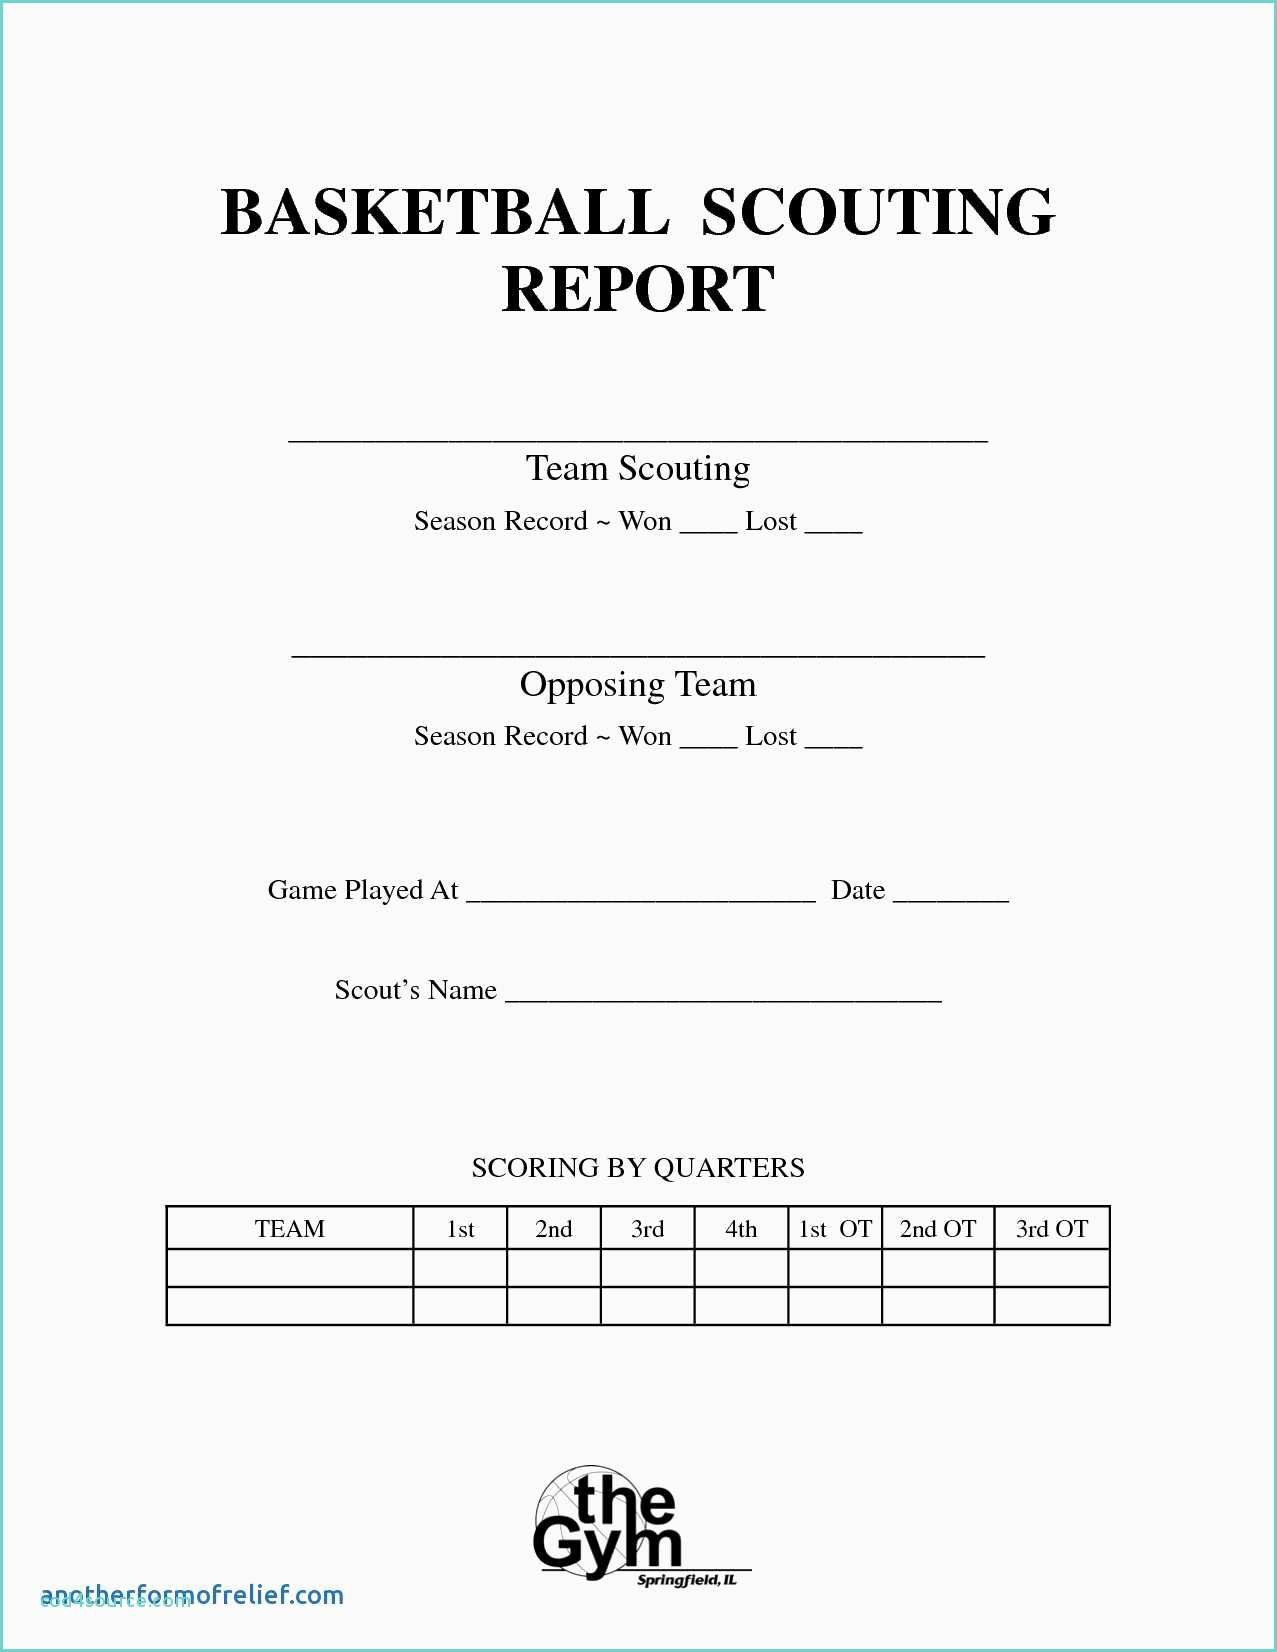 Bowling Spreadsheet And Basketball Scouting Report Template Inside Scouting Report Template Basketball